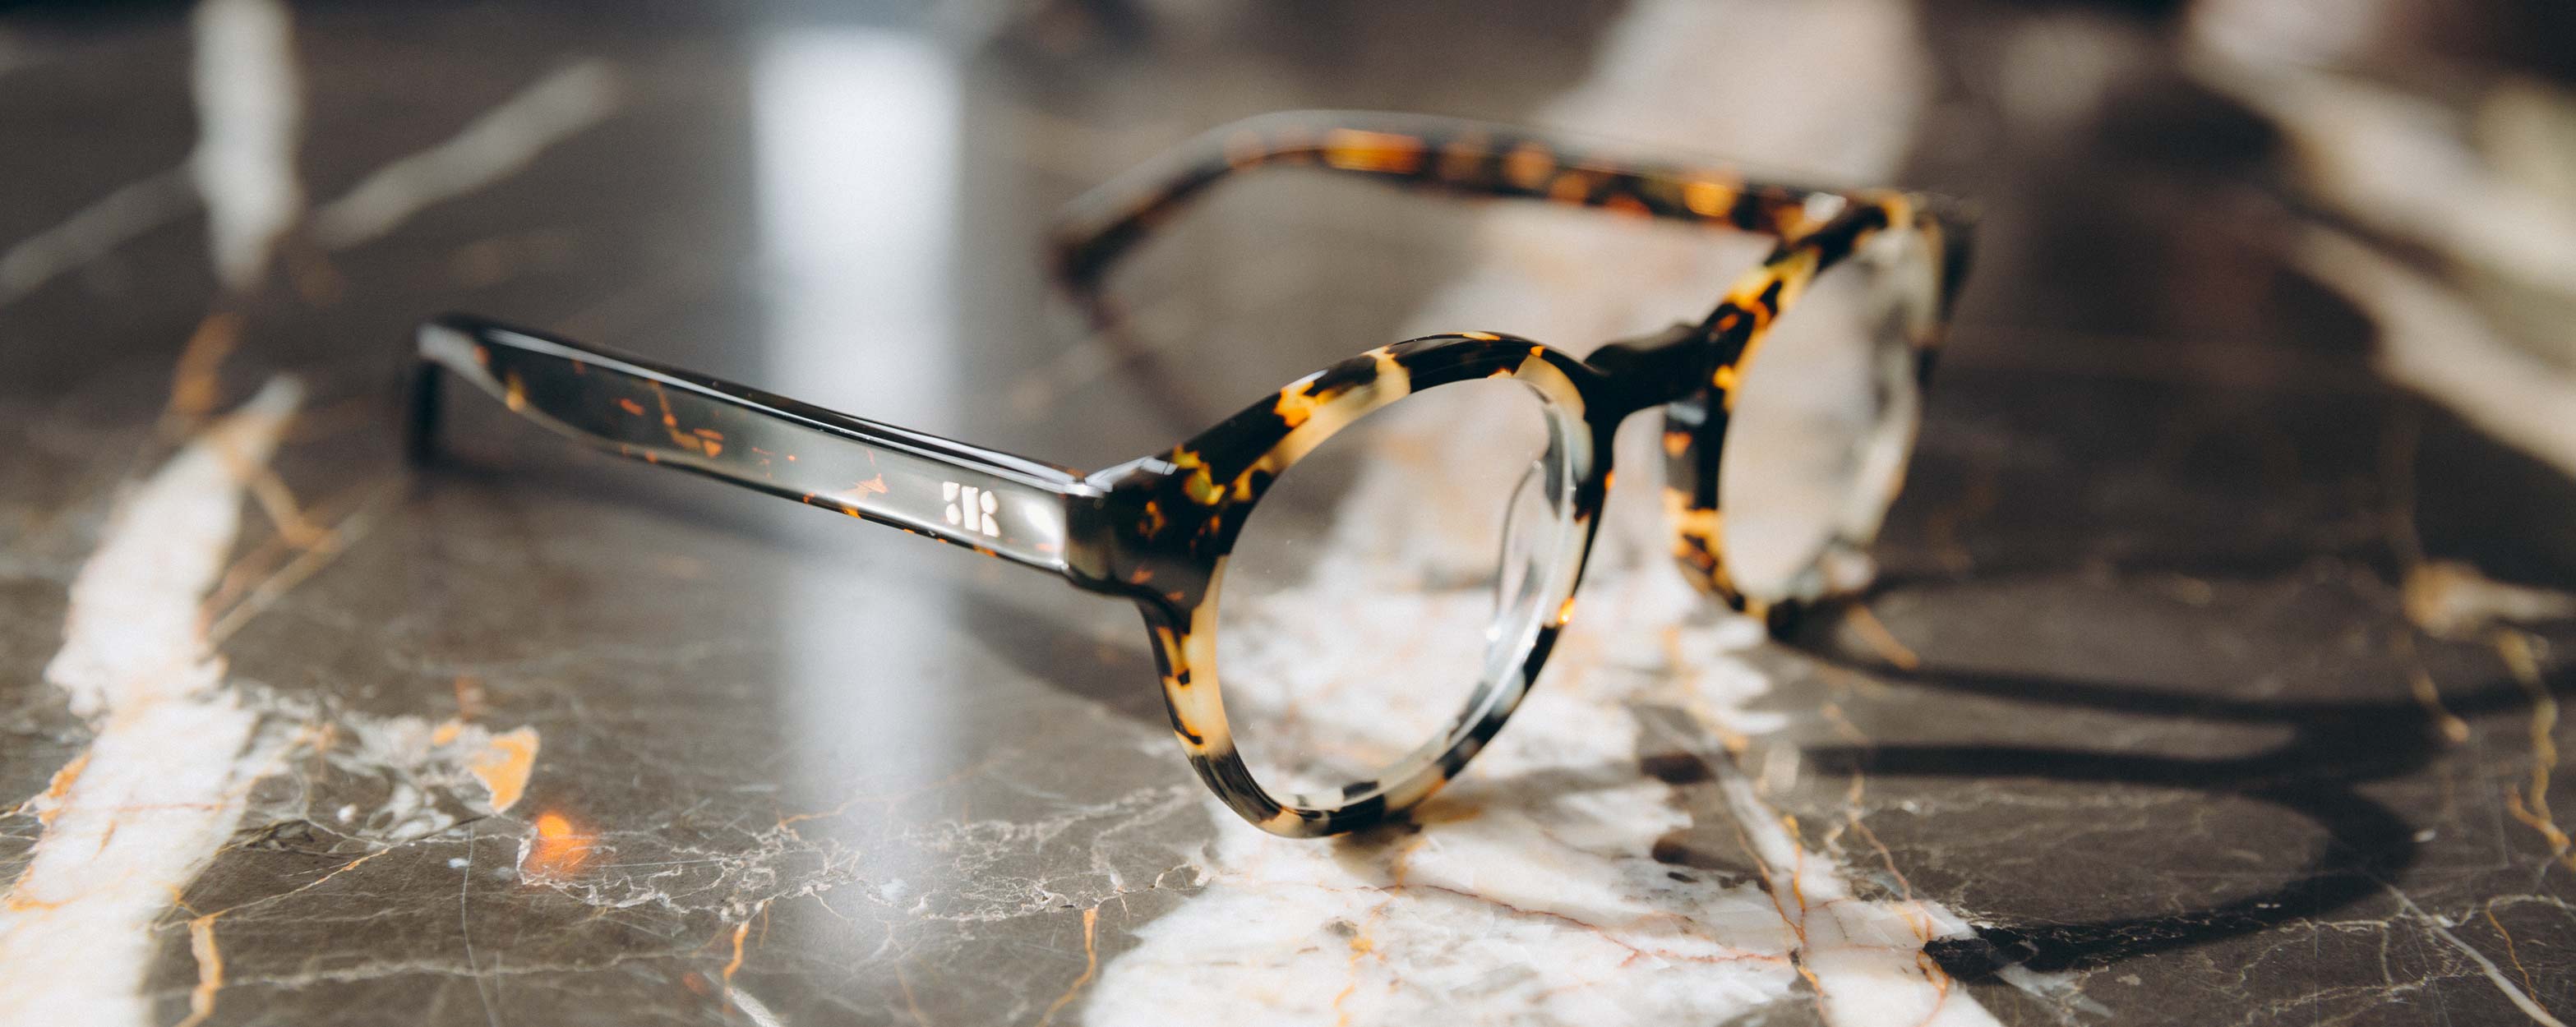 Photo Details of Alexis Black Marble Reading Glasses in a room